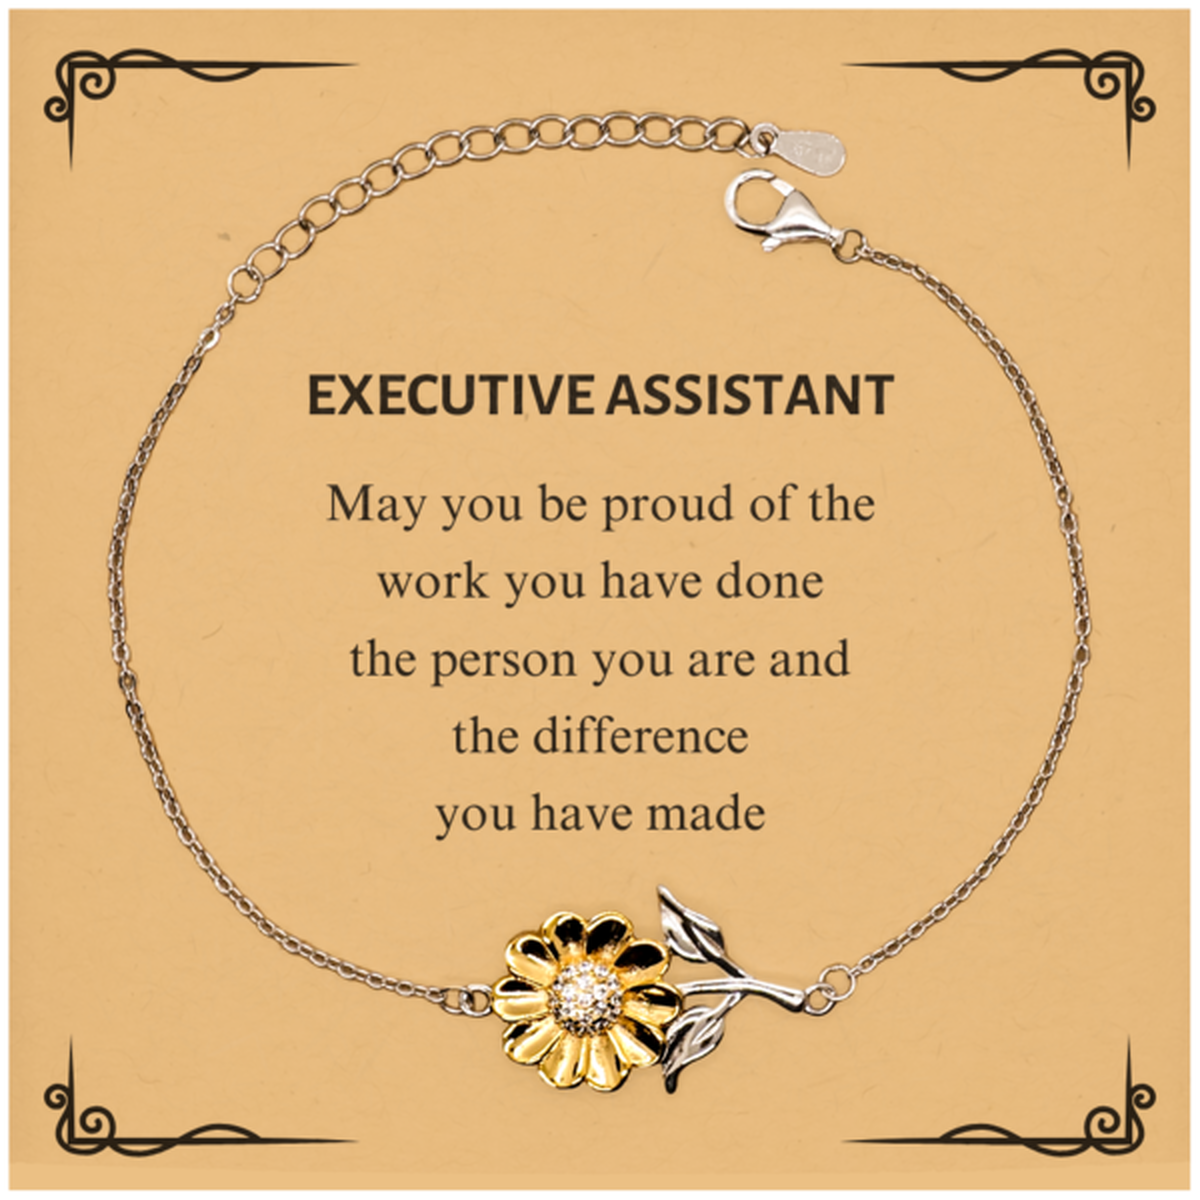 Executive Assistant May you be proud of the work you have done, Retirement Executive Assistant Sunflower Bracelet for Colleague Appreciation Gifts Amazing for Executive Assistant